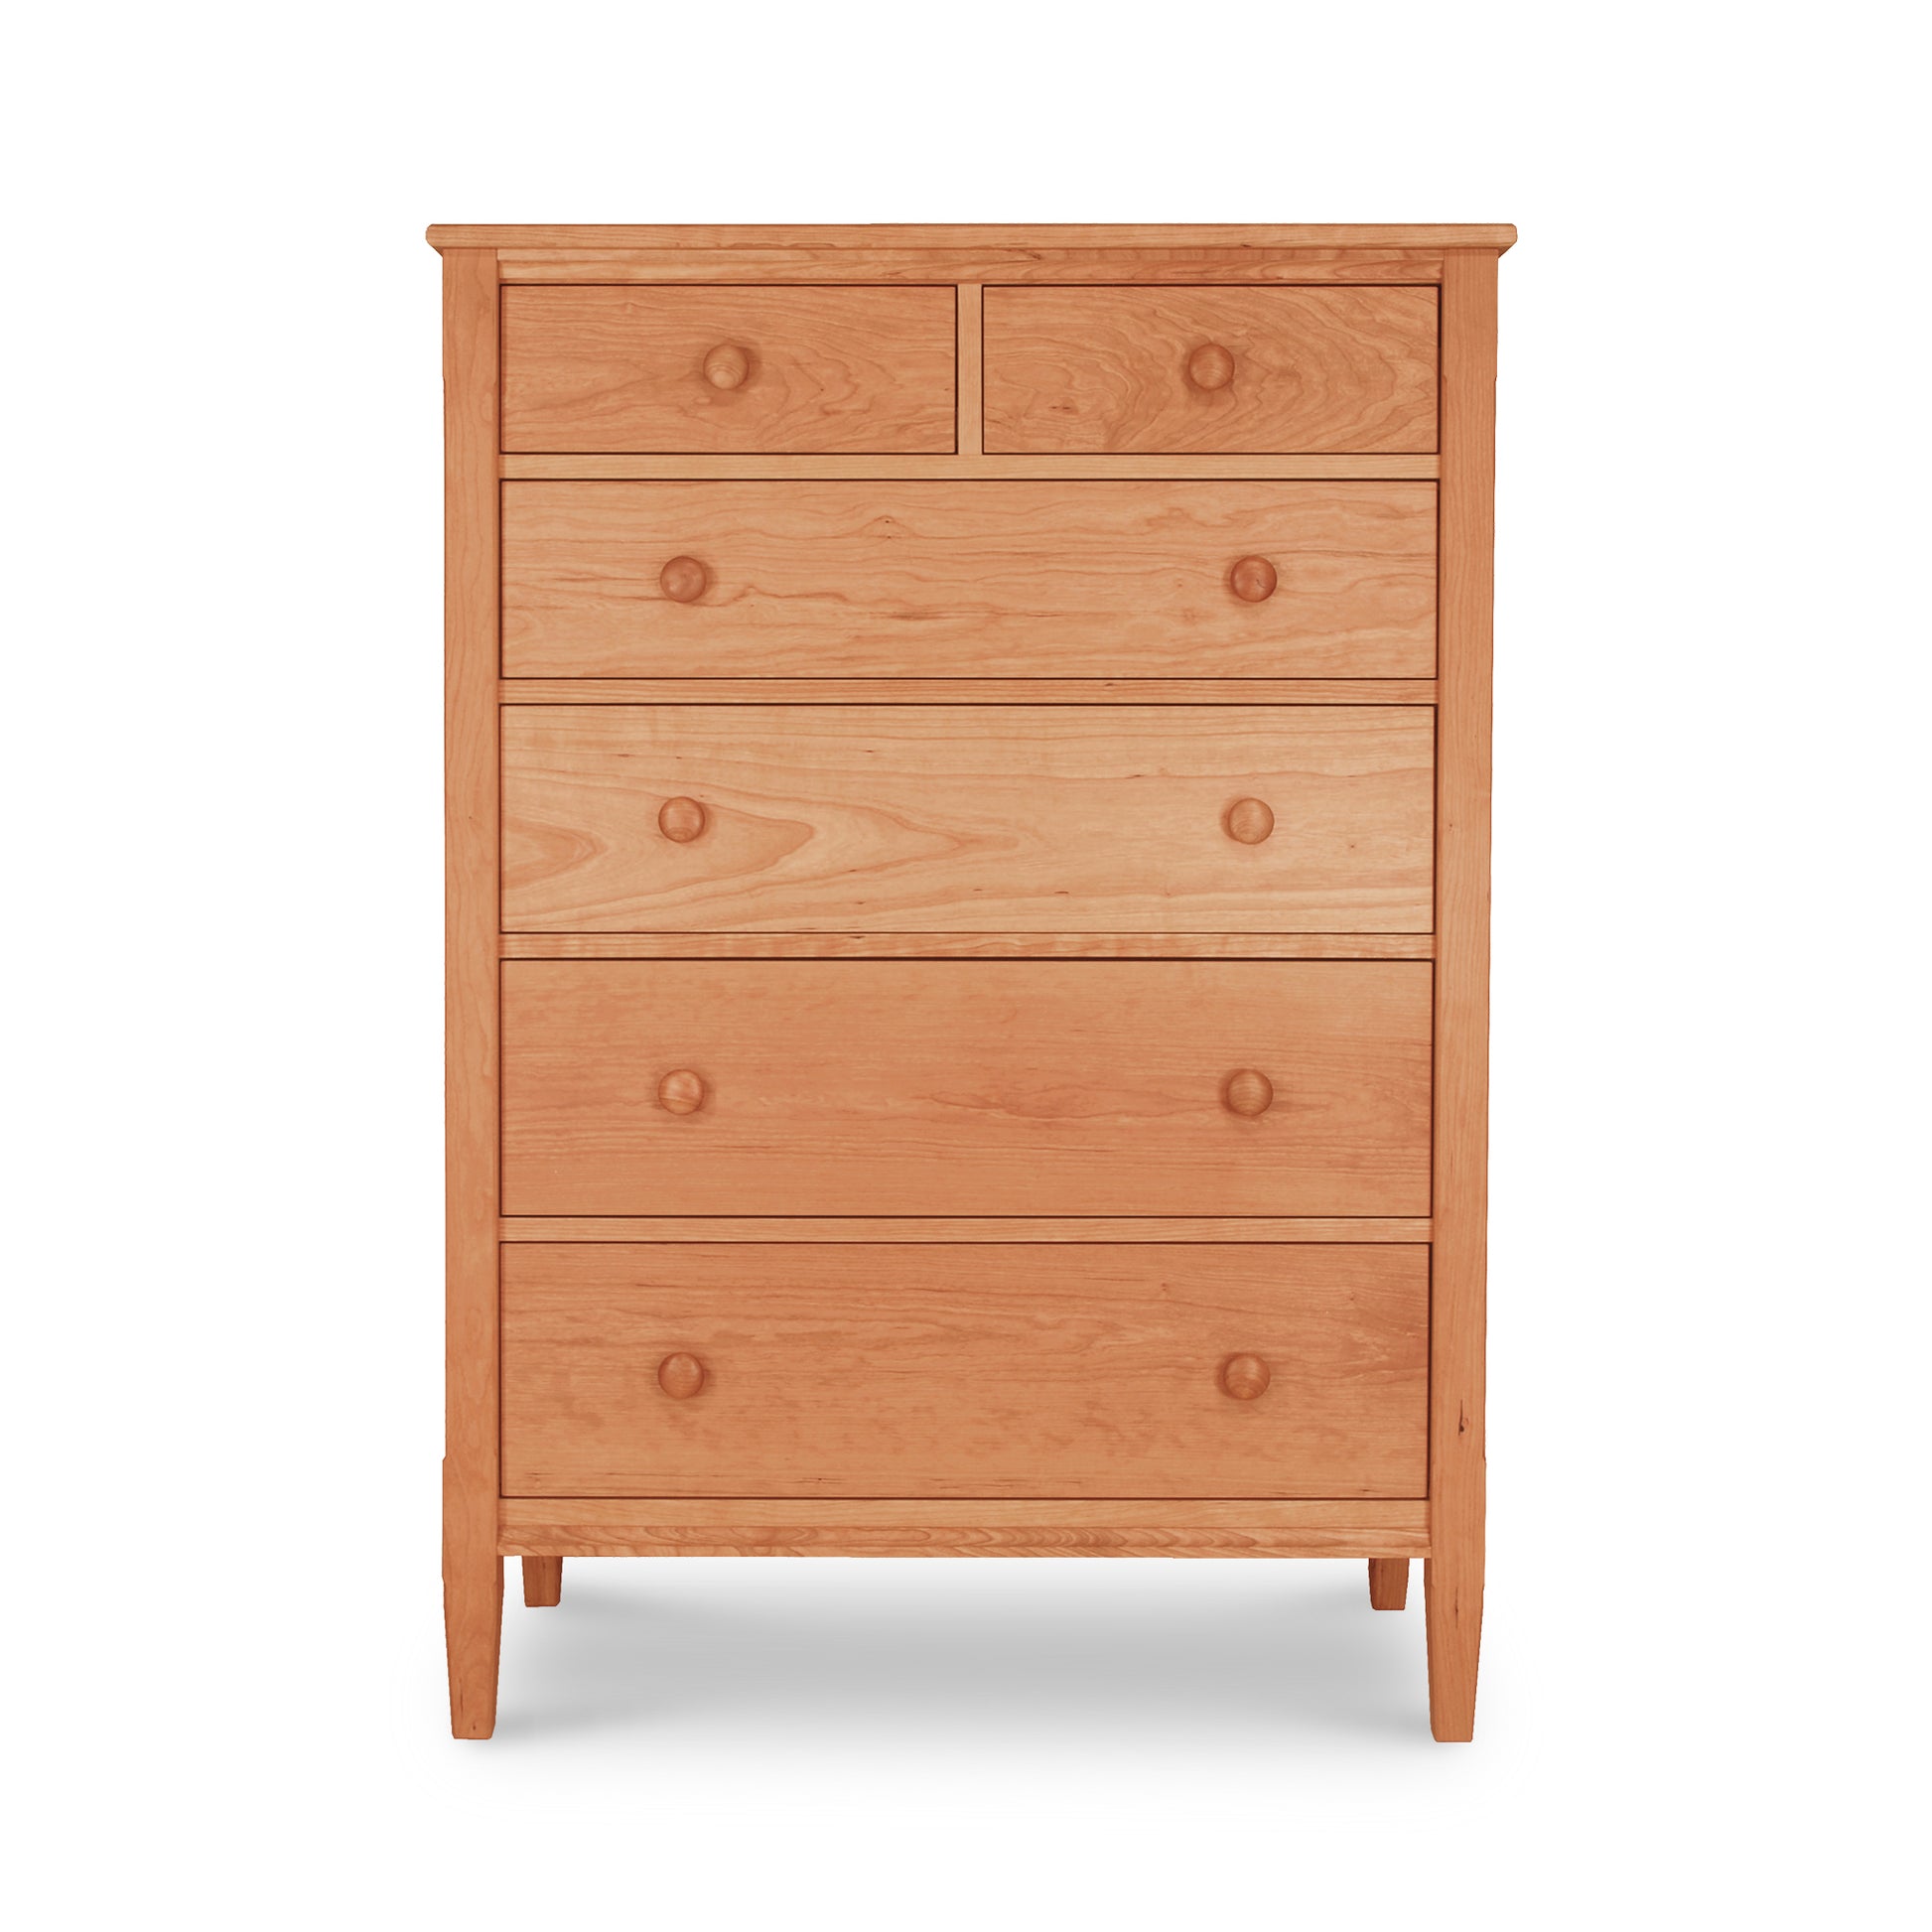 A Maple Corner Woodworks Vermont Shaker 6-Drawer Chest, crafted from hardwoods, displayed on a white background.